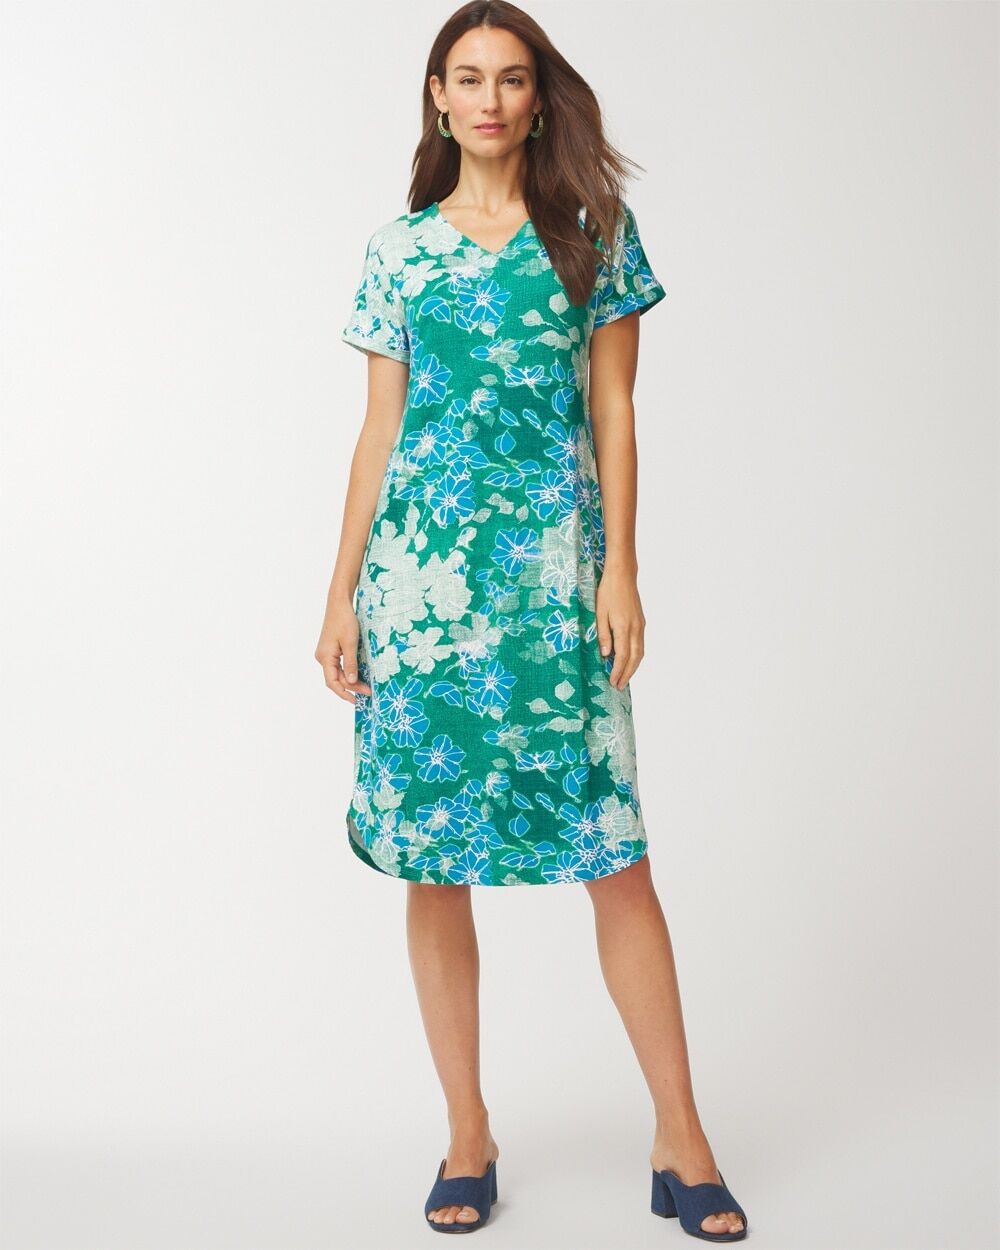 Chico's Off The Rack Women's Prairie Flowers Shirttail Midi Dress in Lotus Leaf Size 8/10   Chico's Outlet, Spring Dresses - Lotus Leaf - Women - Size: 8/10